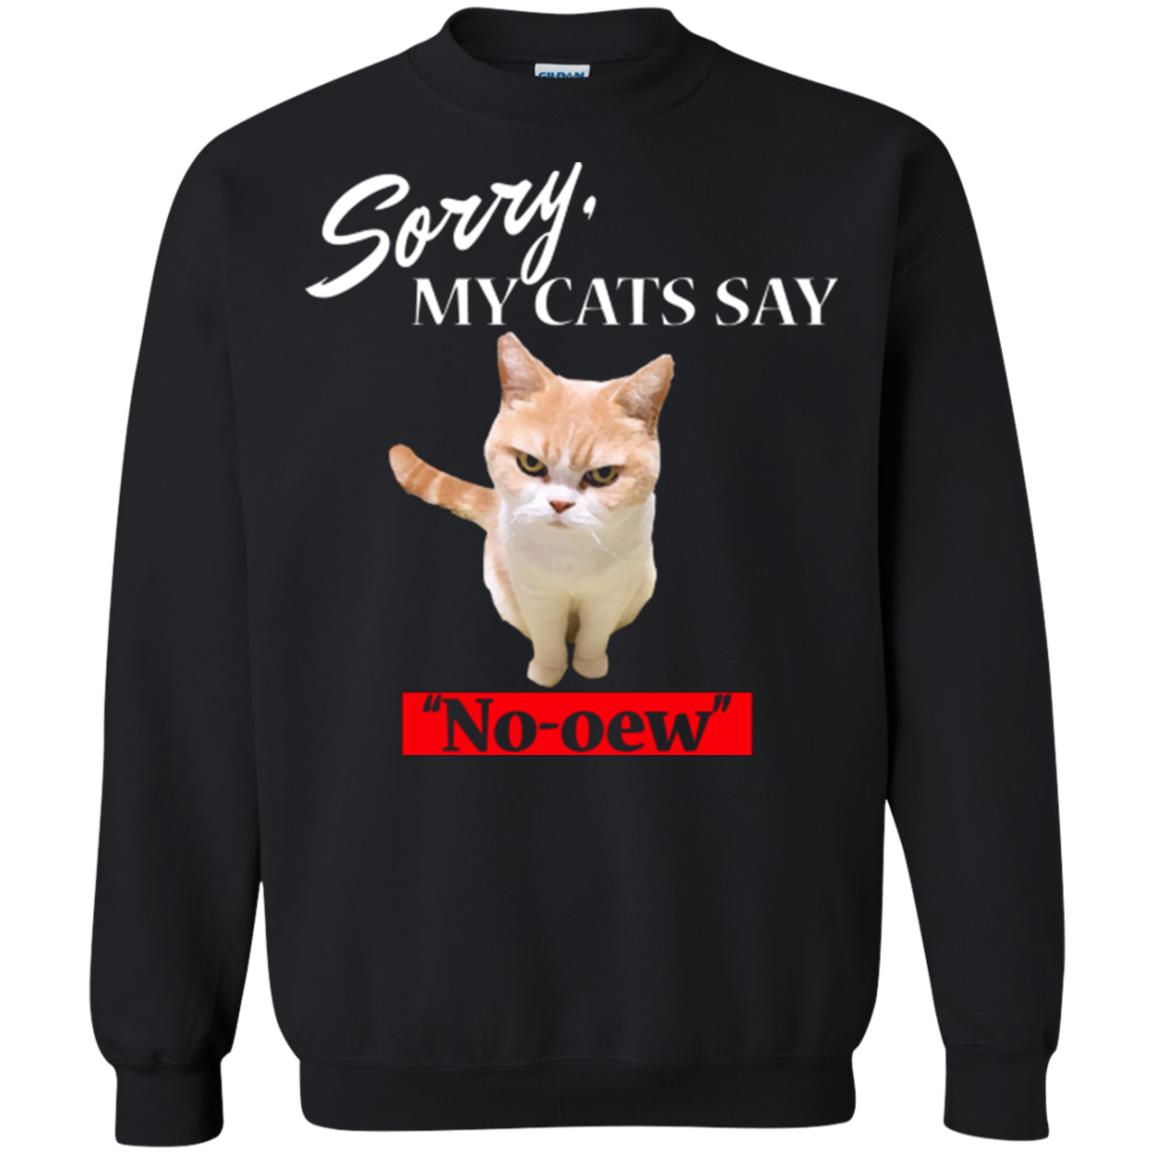 Sorry My Cats Say No-oew Cat Lover T-shirt